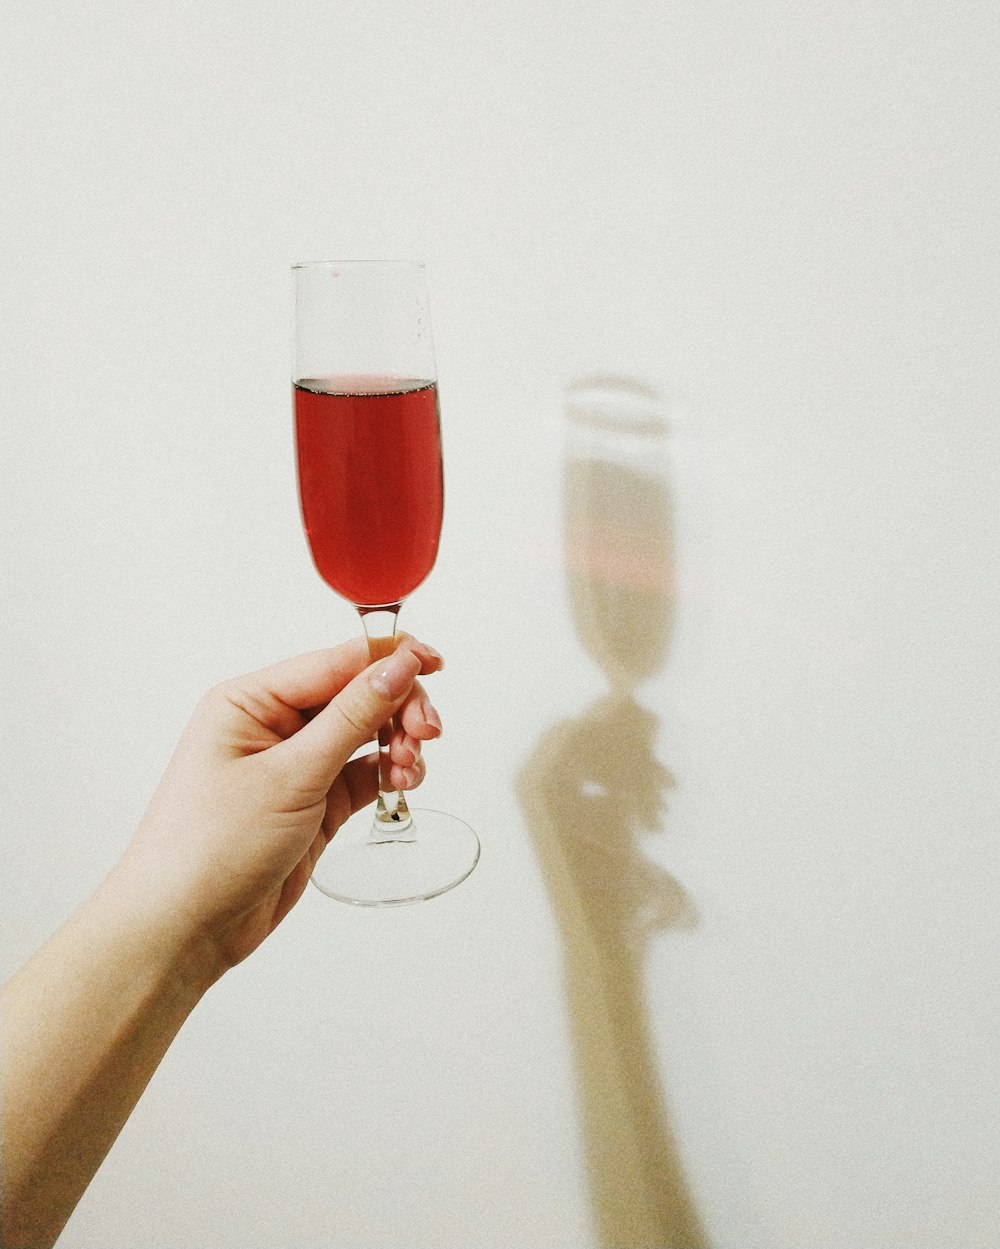 person holding champagne glass with red liquid